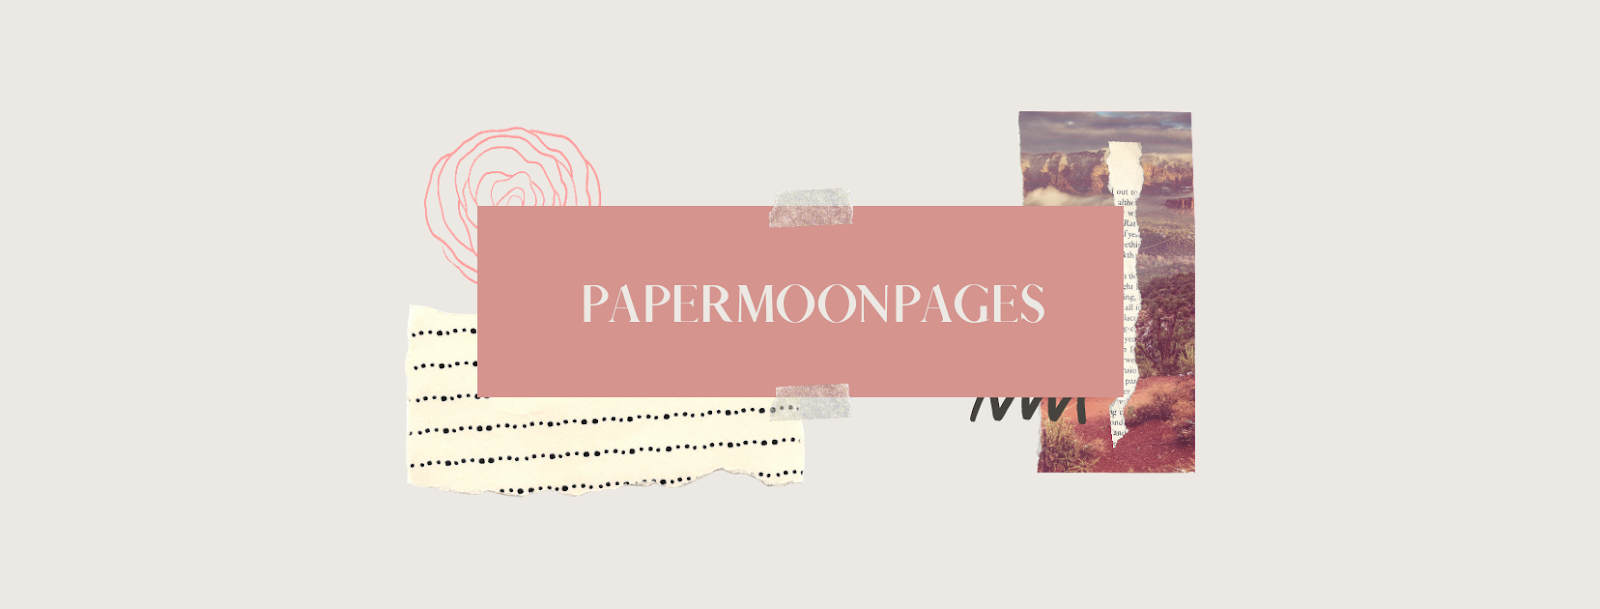 papermoonpages